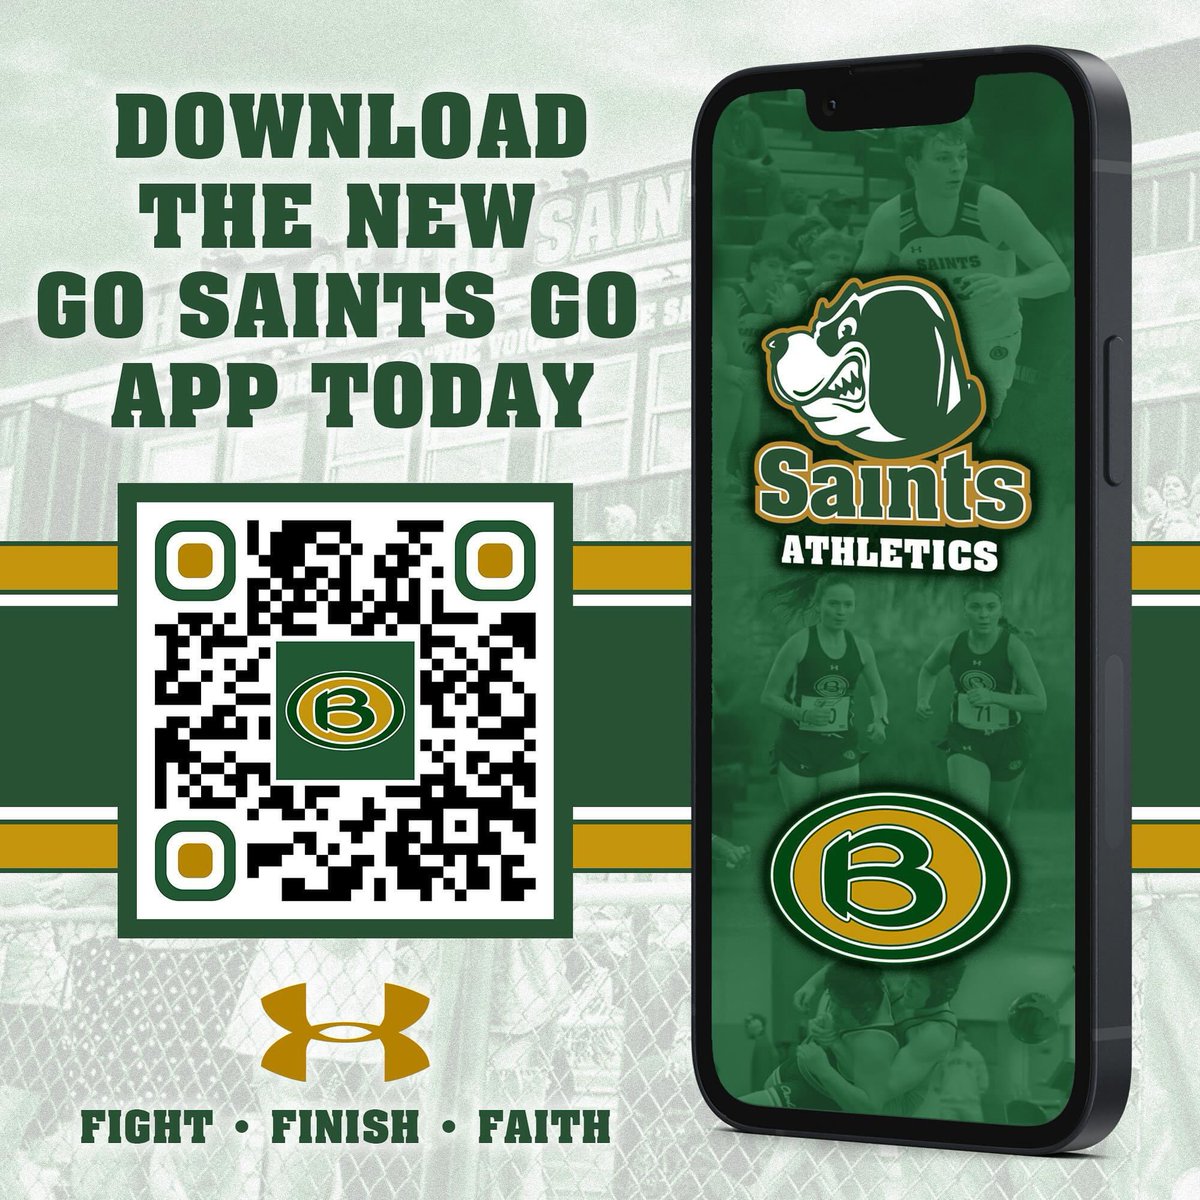 BIG NEWS: There’s a new way to follow your favorite Saints sports teams - the Go Saints Go app! Check rosters, scores, schedules and more on your smartphone - anytime and anywhere. Download it today by searching Briarcrest in the App Store.